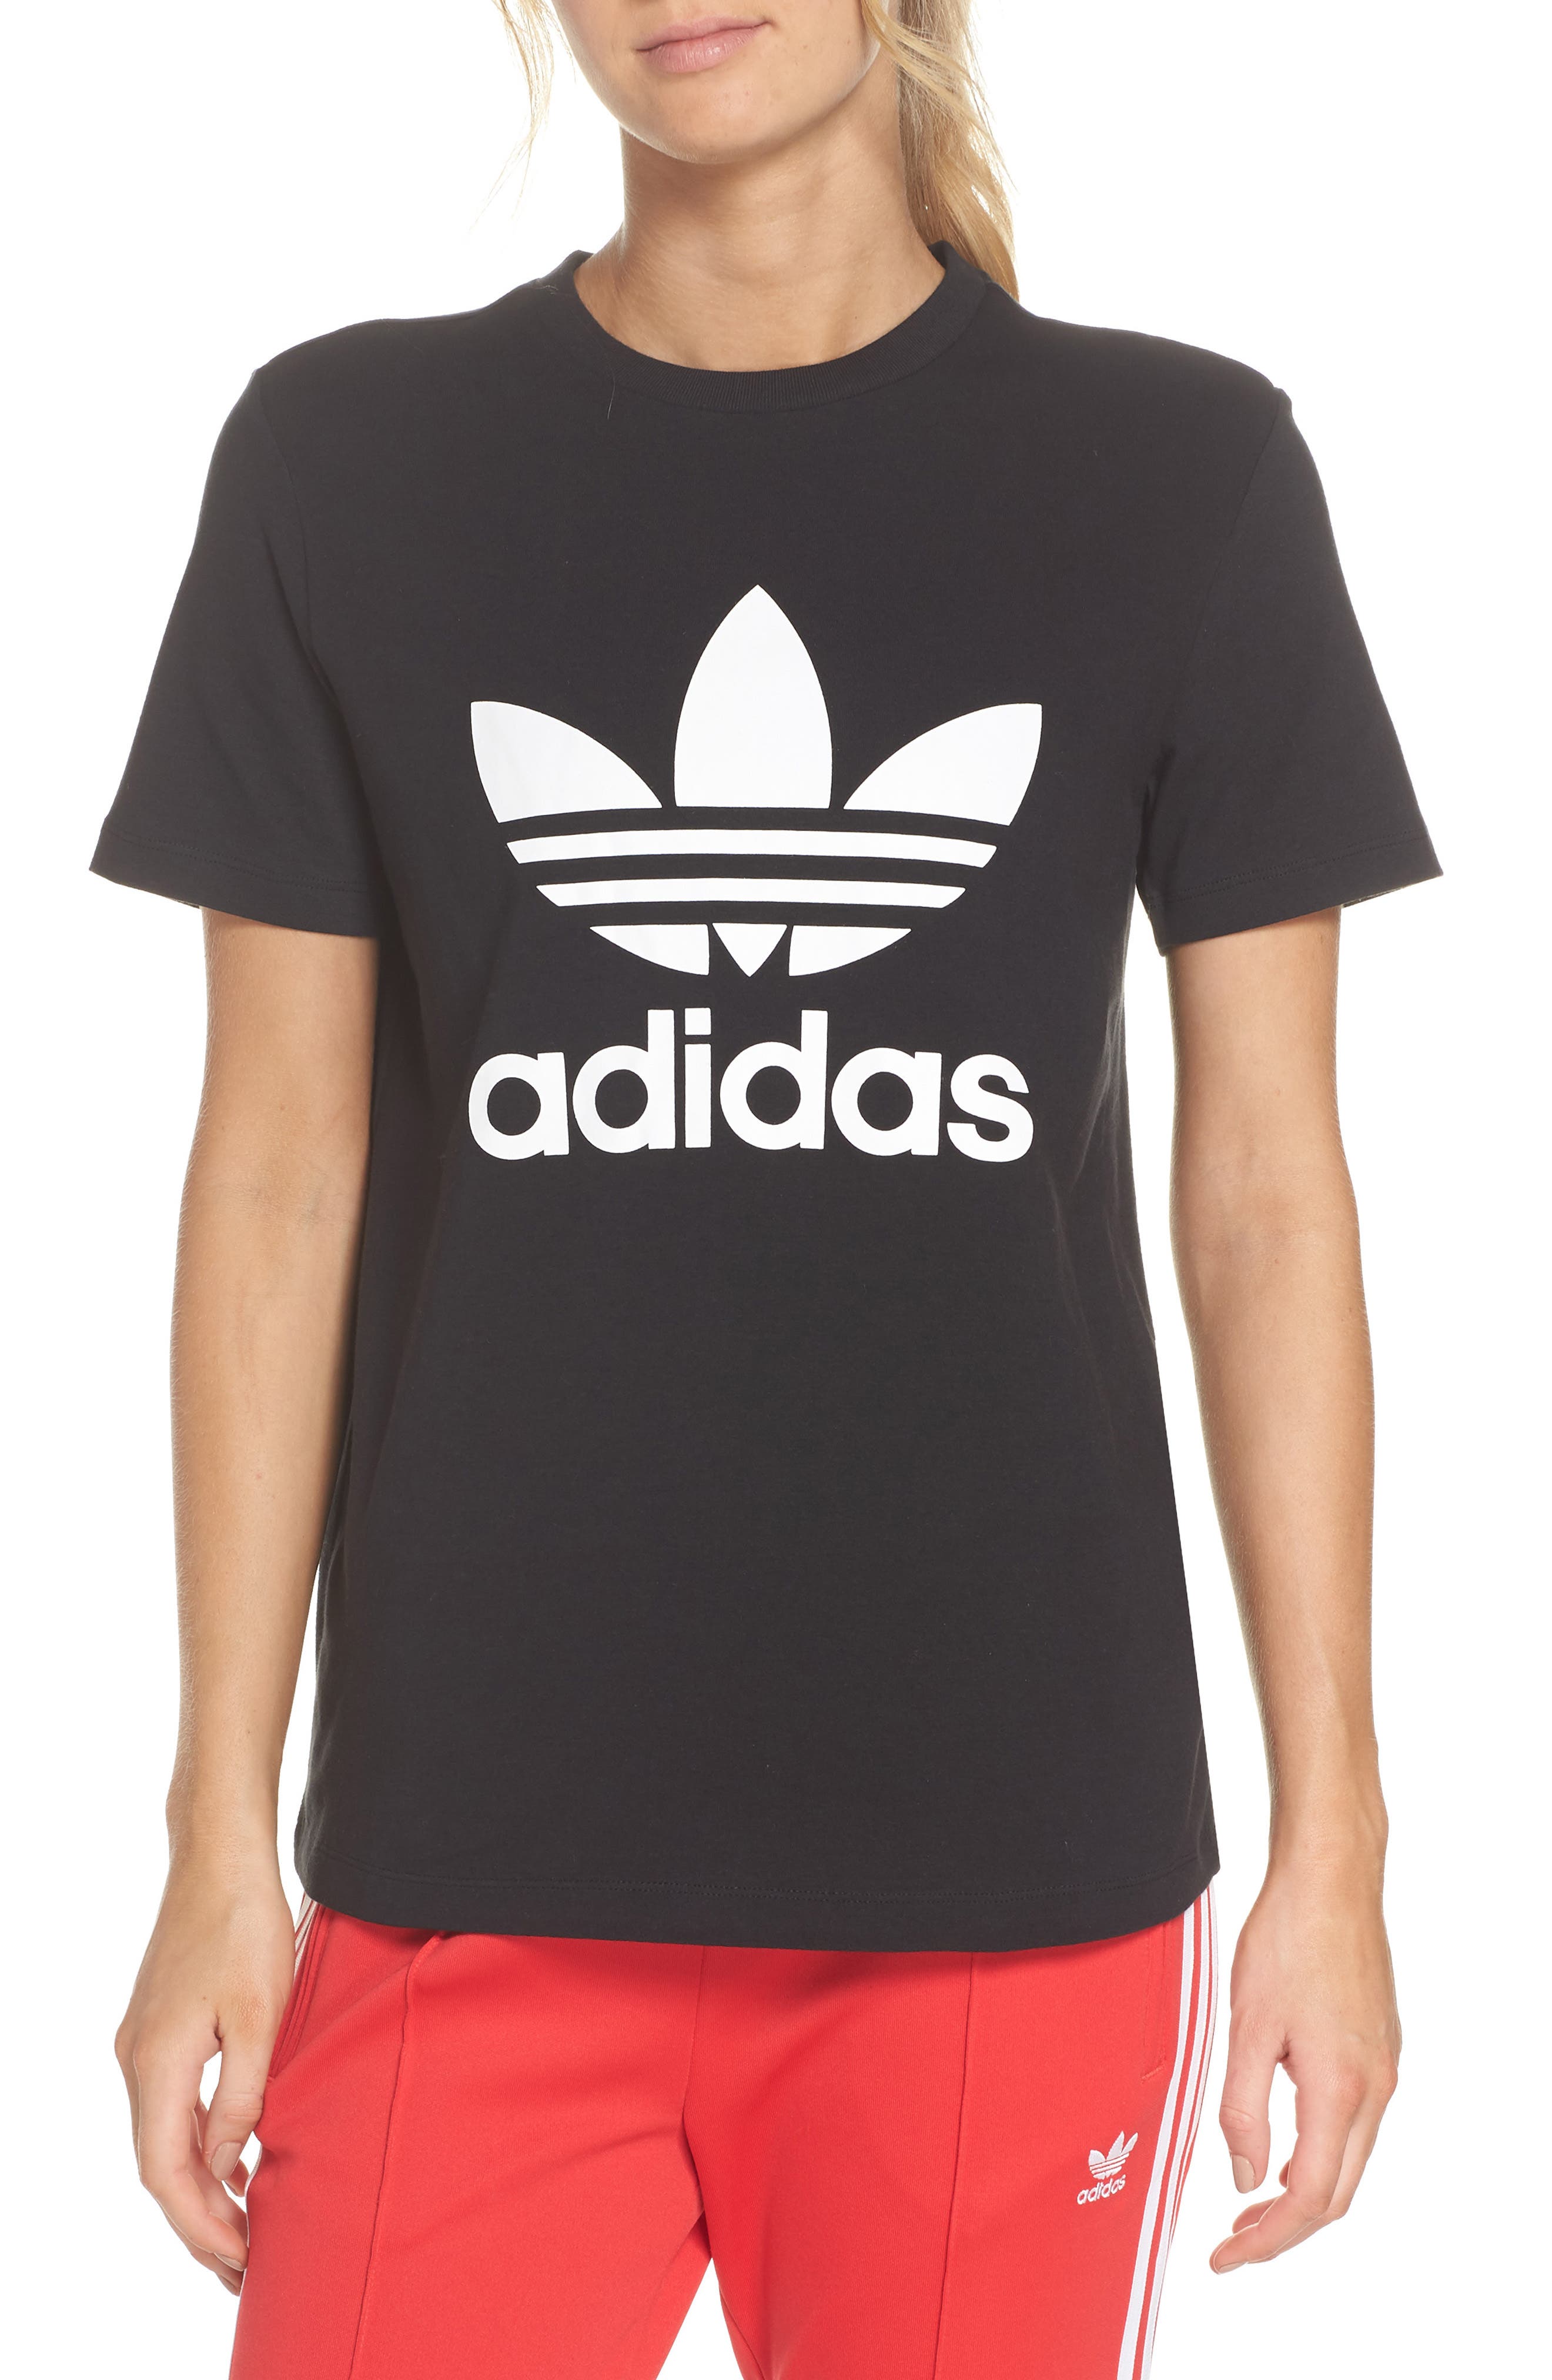 UPC 190311439931 product image for adidas Originals adidas Trefoil Tee, Size Small in Black/White at Nordstrom | upcitemdb.com